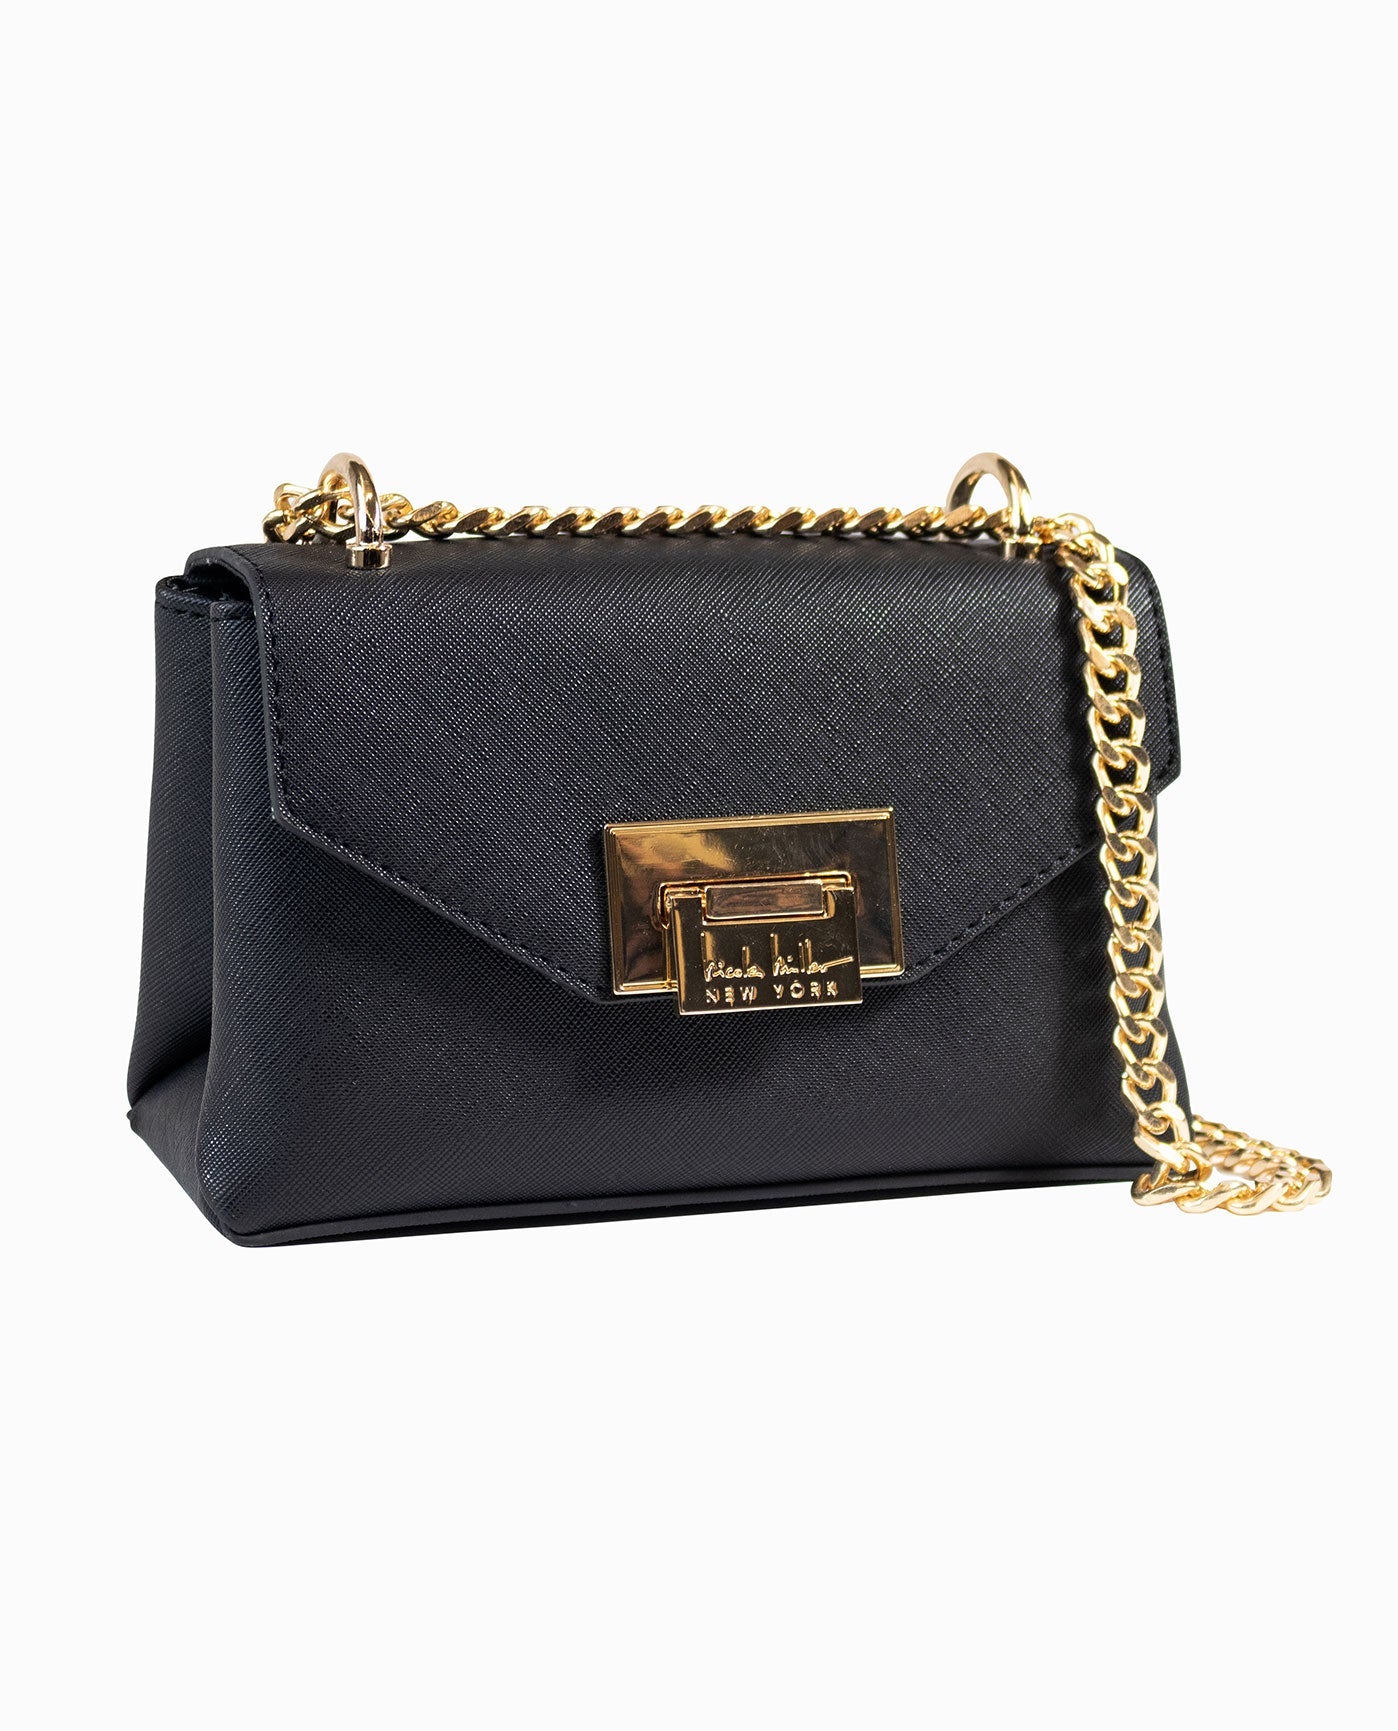 Bags, Small Black Purse With Gold Chain